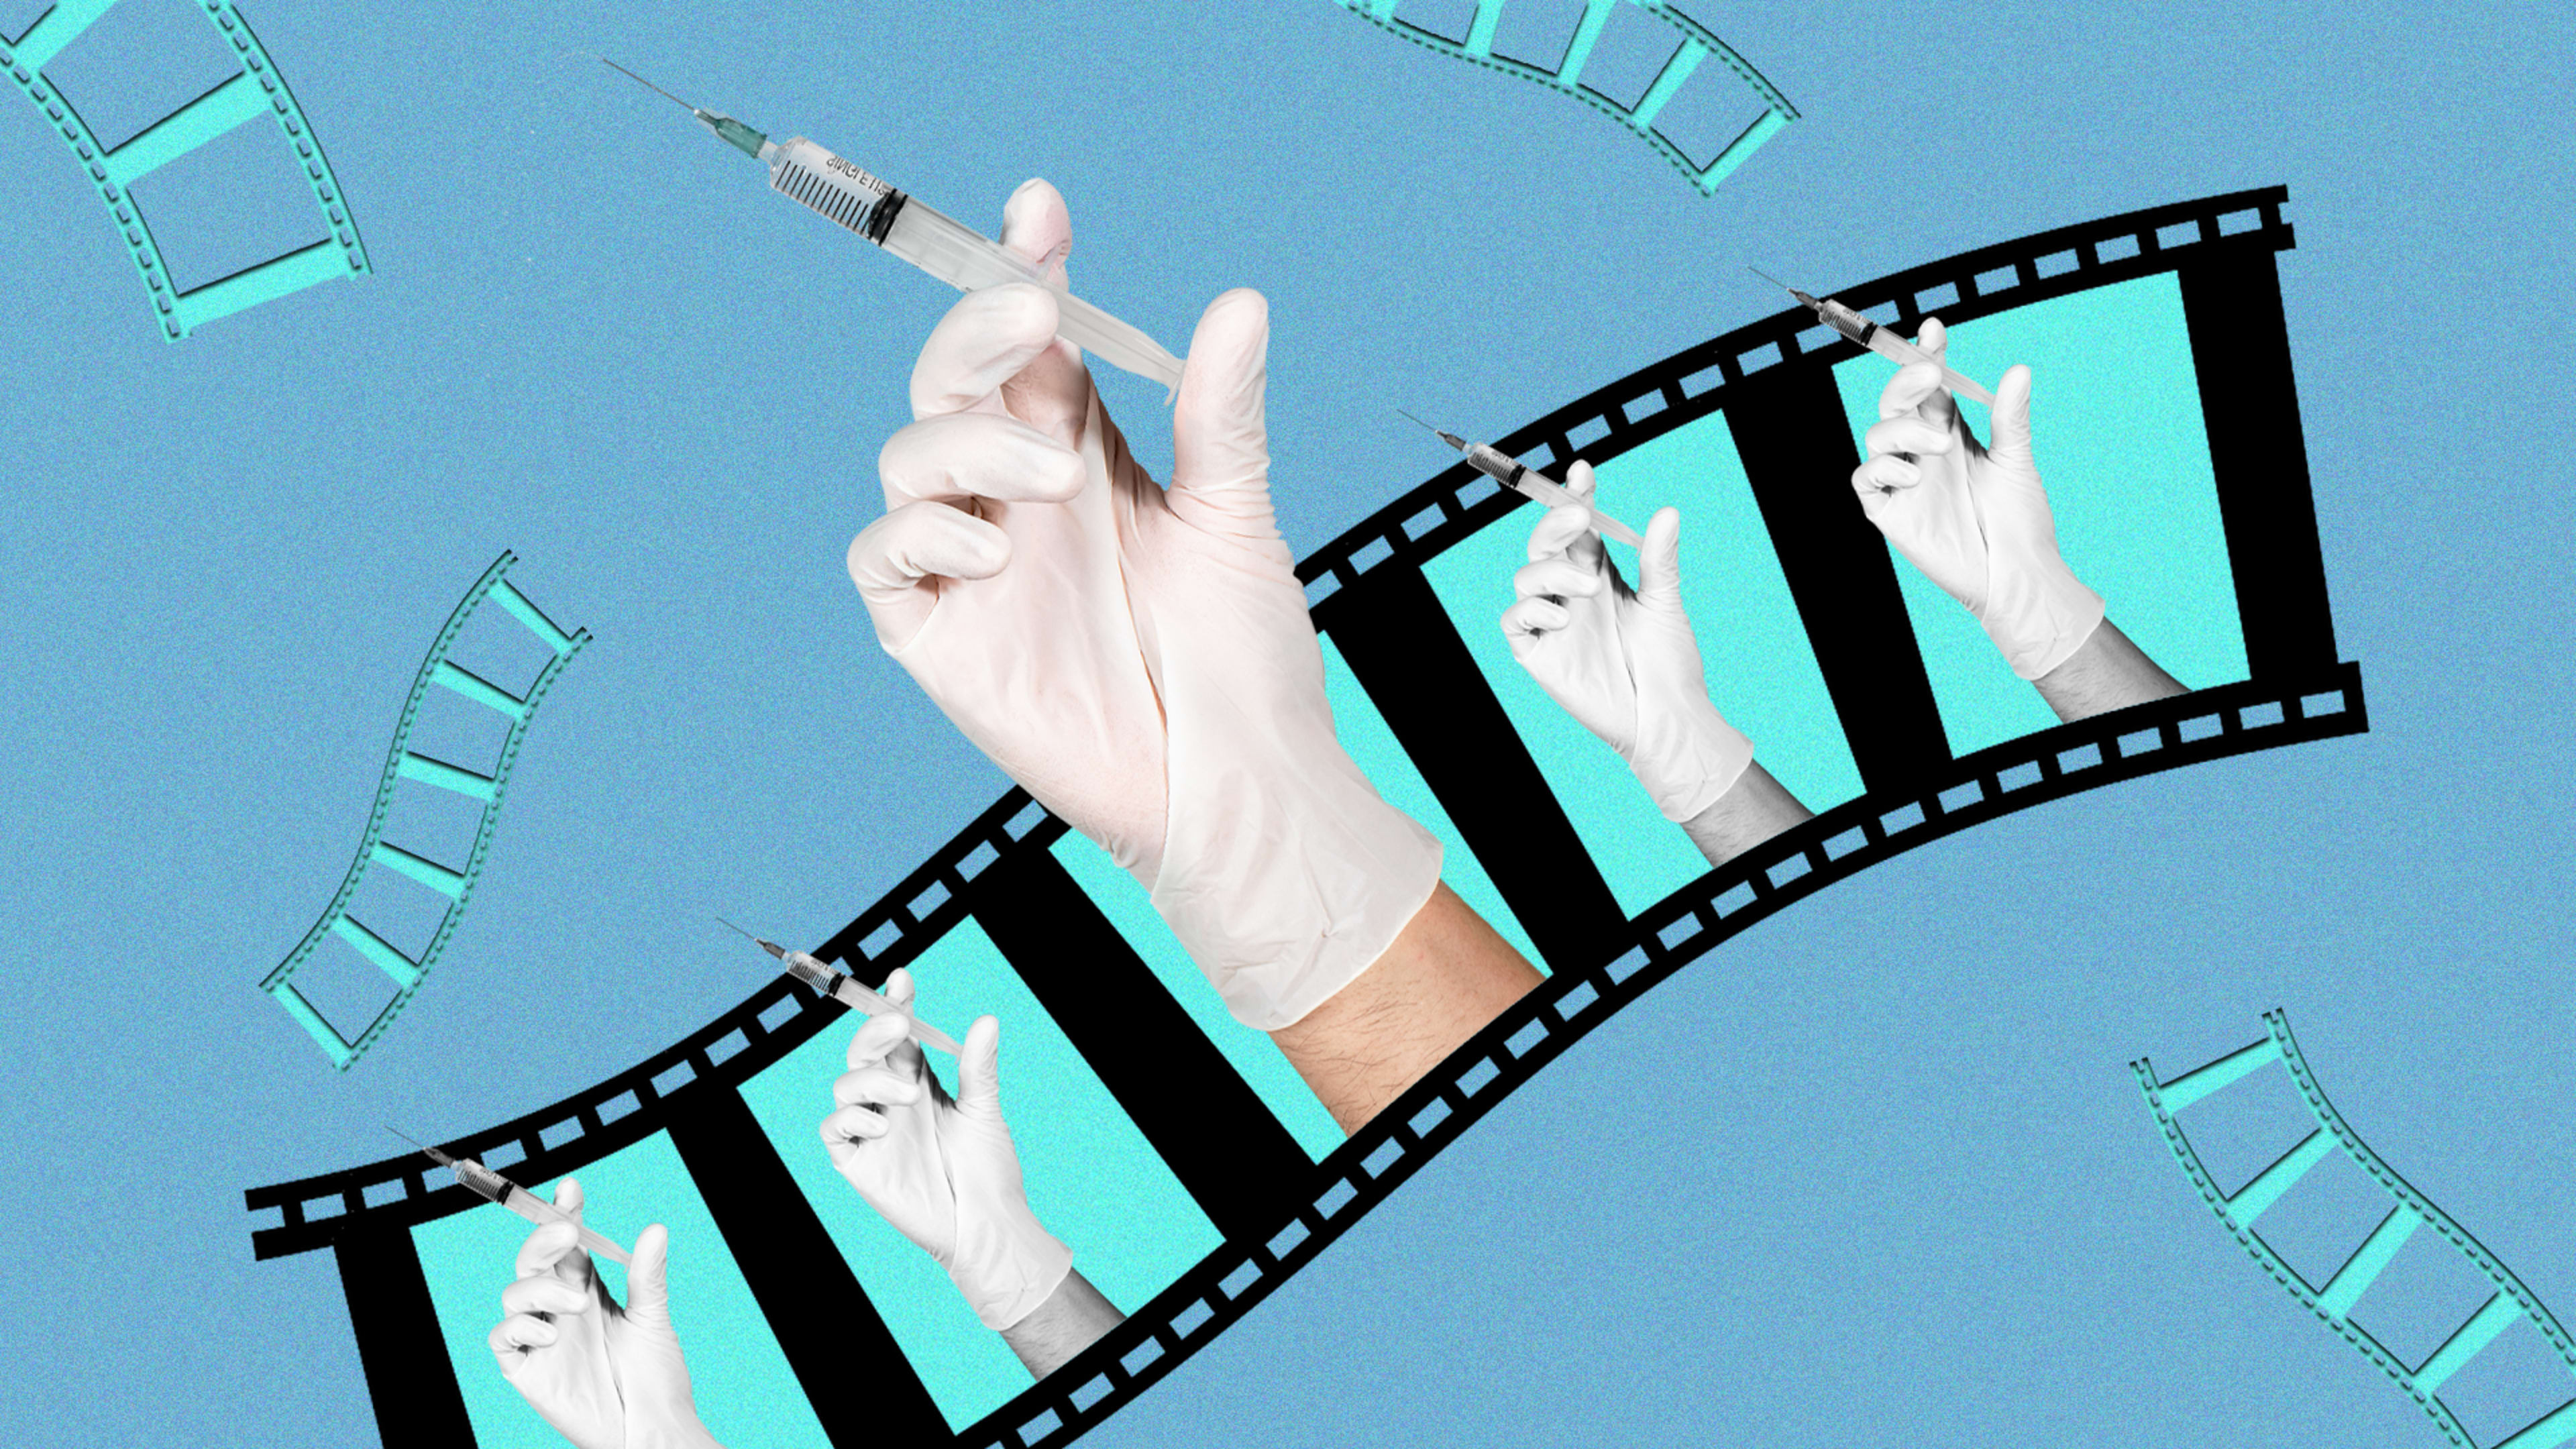 Bad news, Hollywood: 90% of survey respondents want COVID-19 vaccine before going back to movies